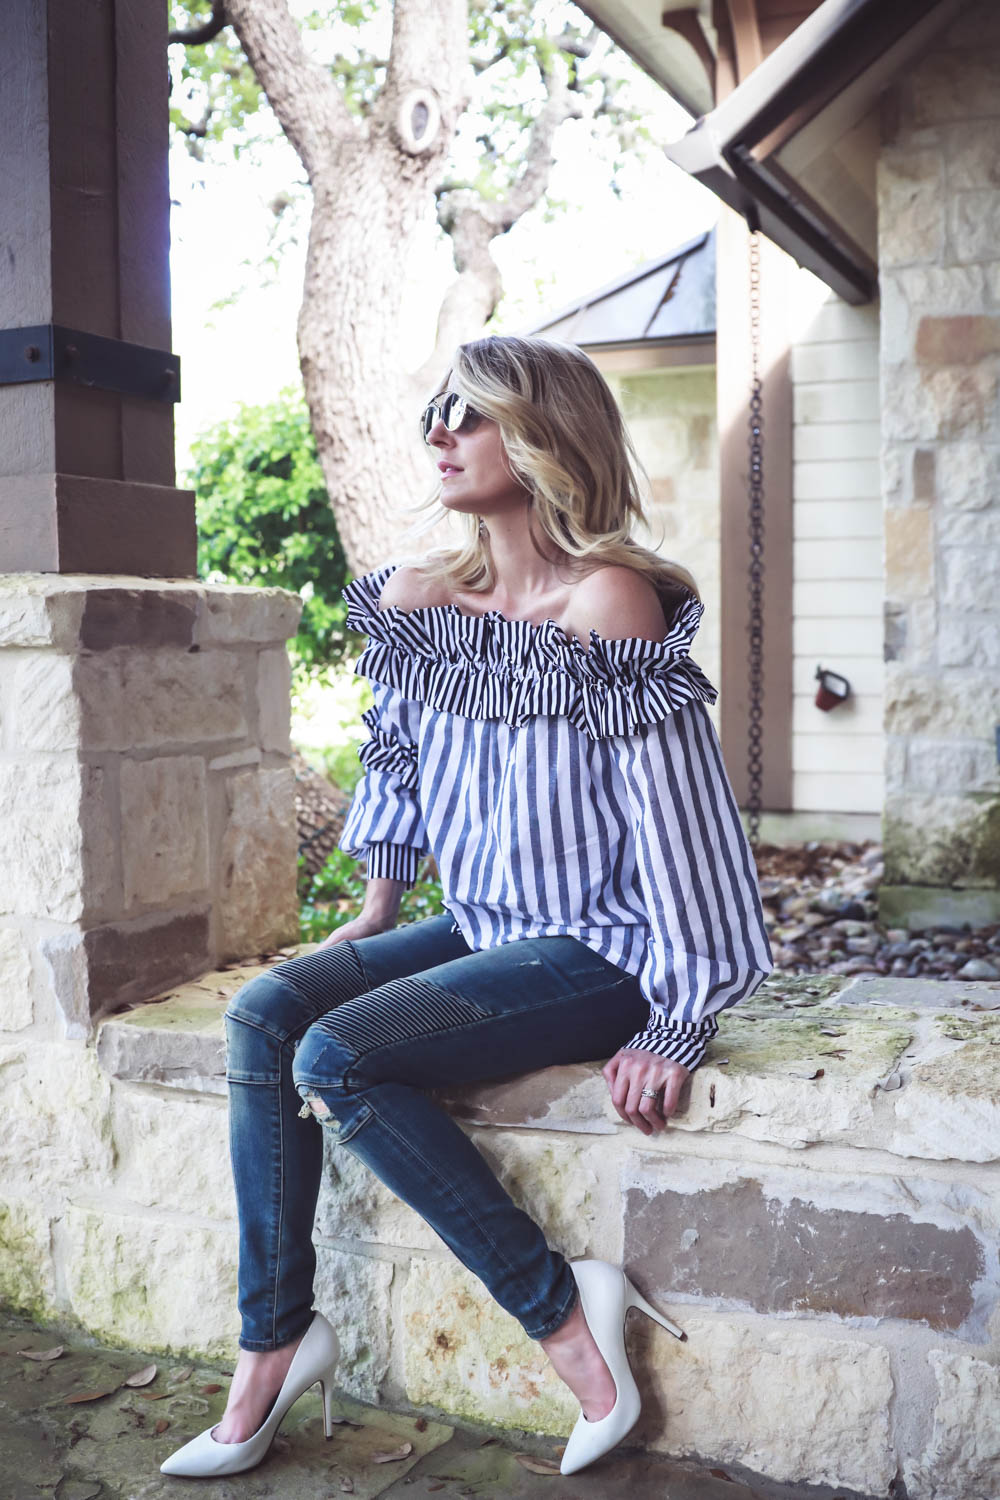 What I Wore video series by Erin Busbee, fashion blogger and youtuber for busy women over 40, featuring an off-shoulder, ruffle, striped top from Shein, a pair of moto skinny jeans by Lovers + Friends, and a pair of white pumps by Charles David shoes